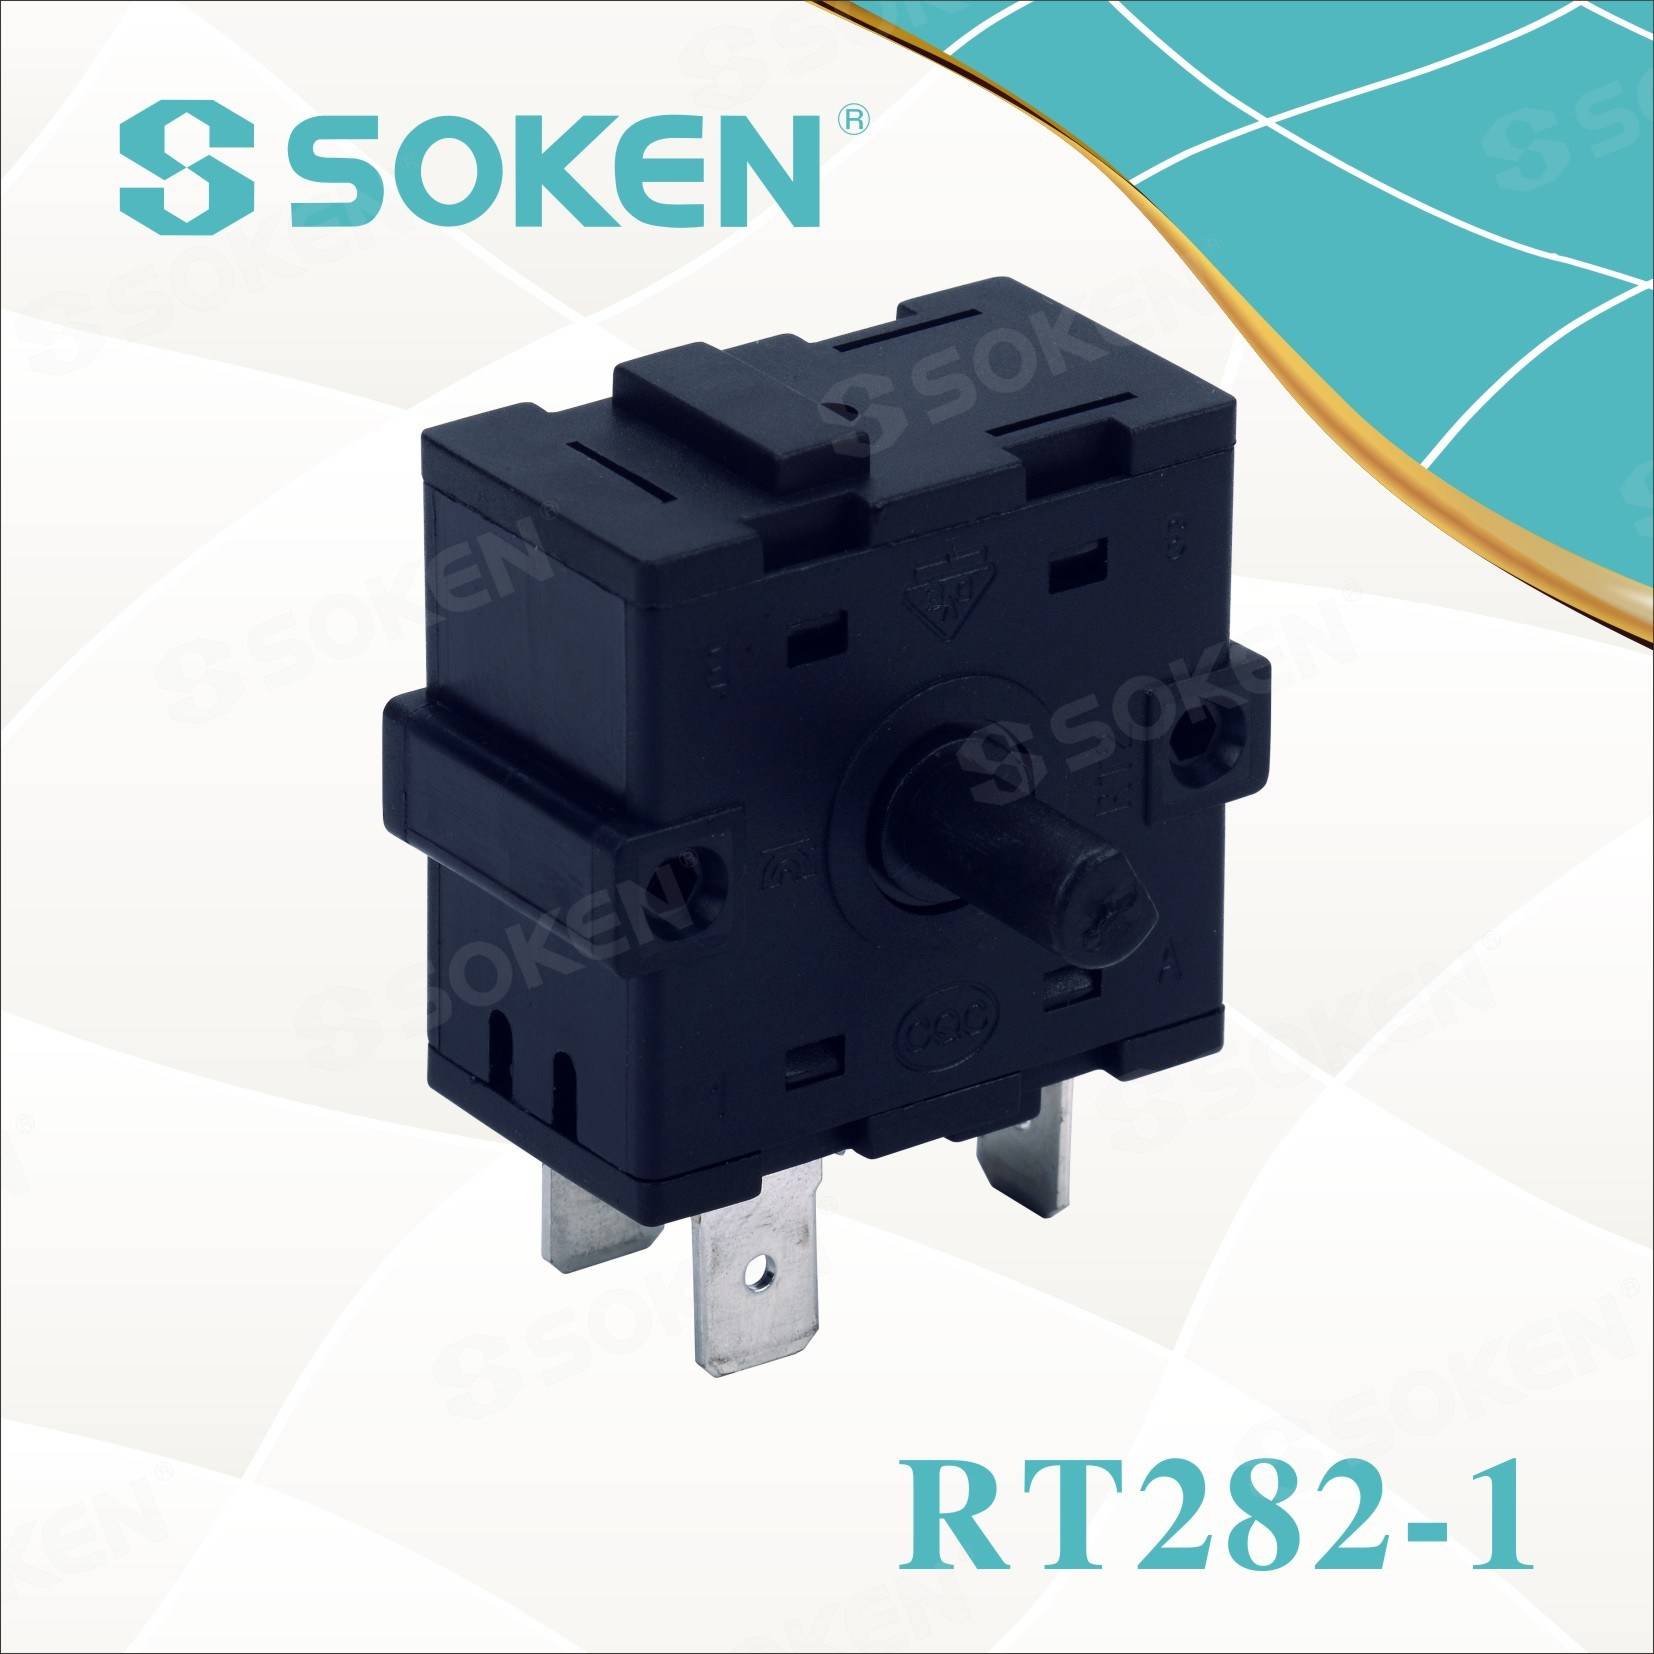 Wholesale Dealers of Marine Led Rocker Switch -
 Soken 8 Position Cooker Rotary Switch – Master Soken Electrical